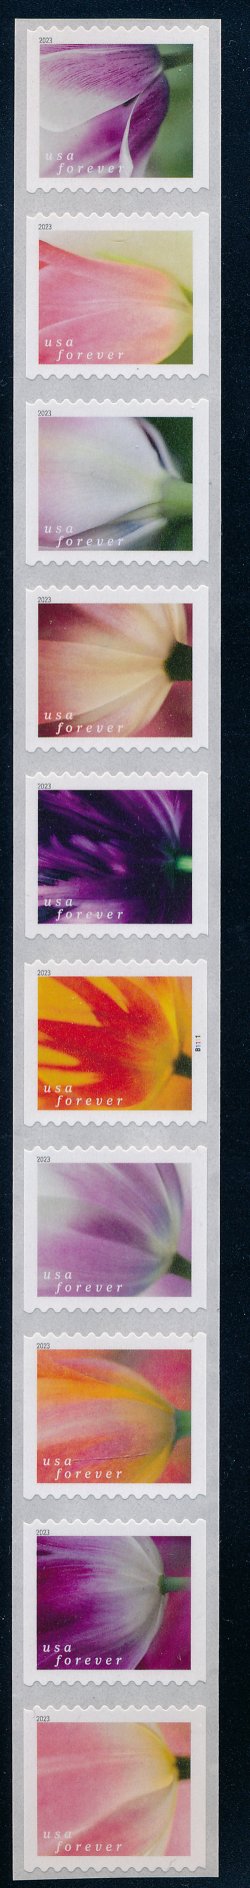 5767-76 Forever Tulip Blossom Mnh PNC of 10 #5767-76pnc